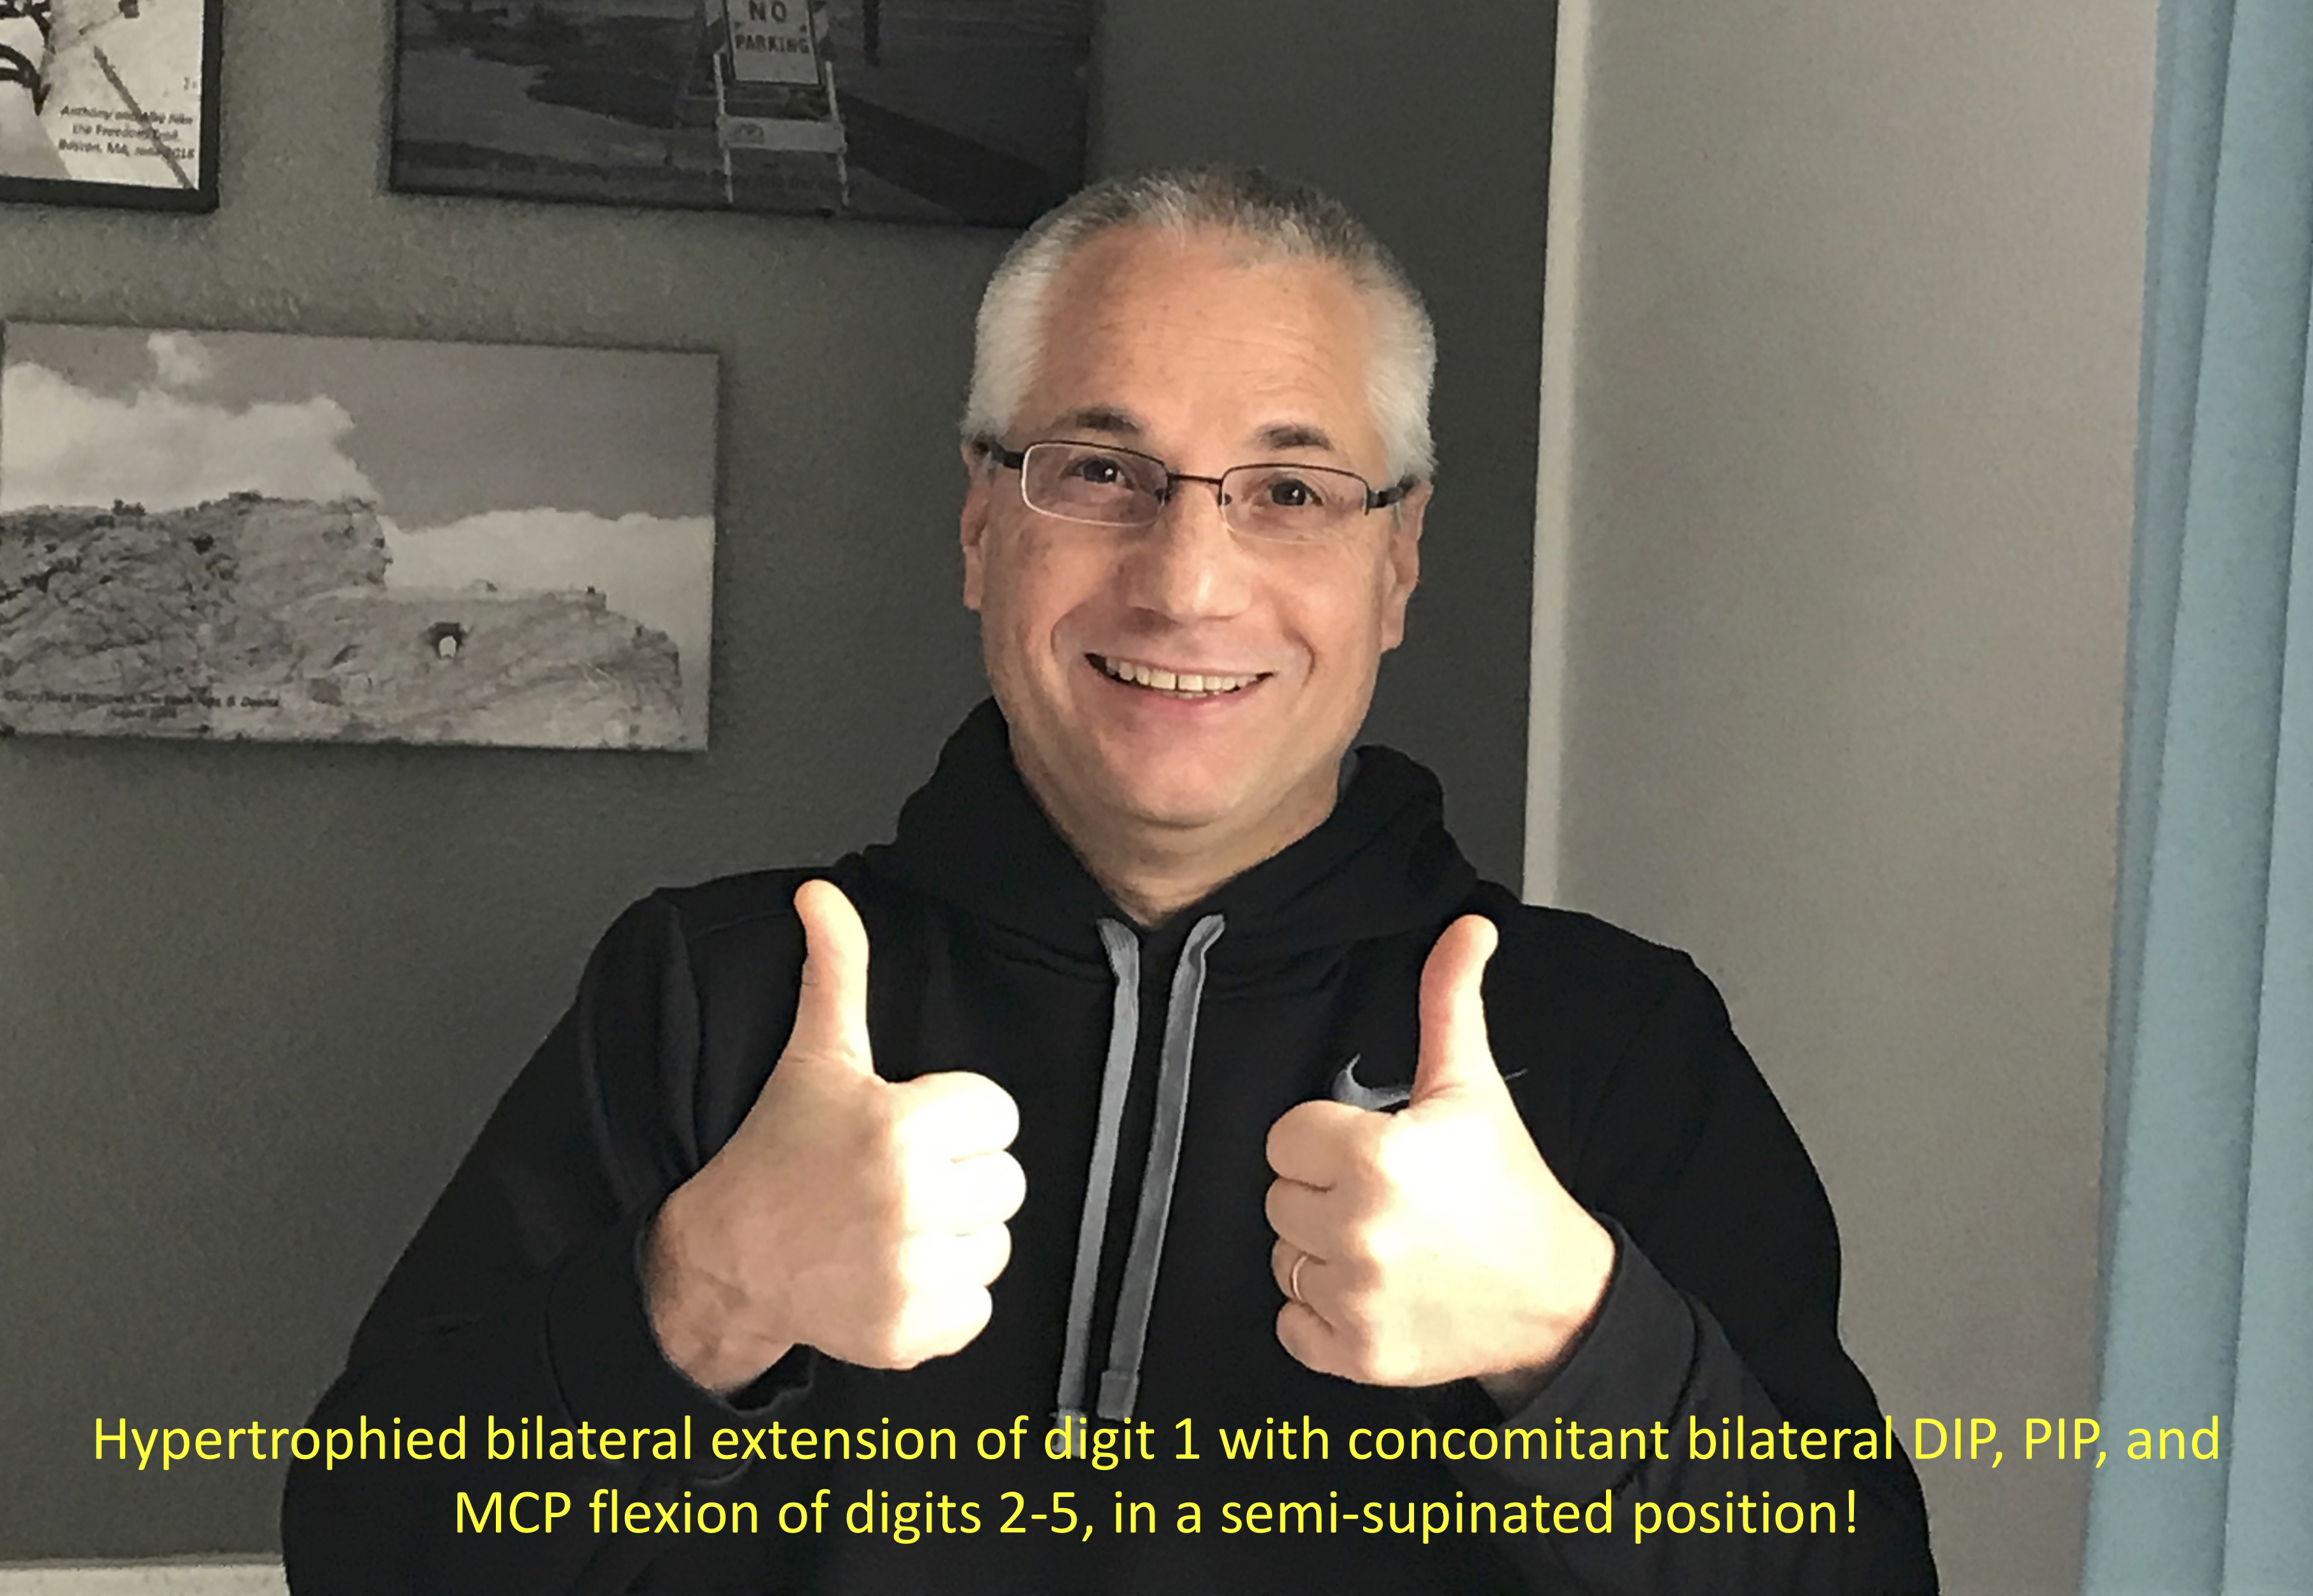 Photo of a man gesturing with two thumbs up, with text describing in anatomical terms the gesture.